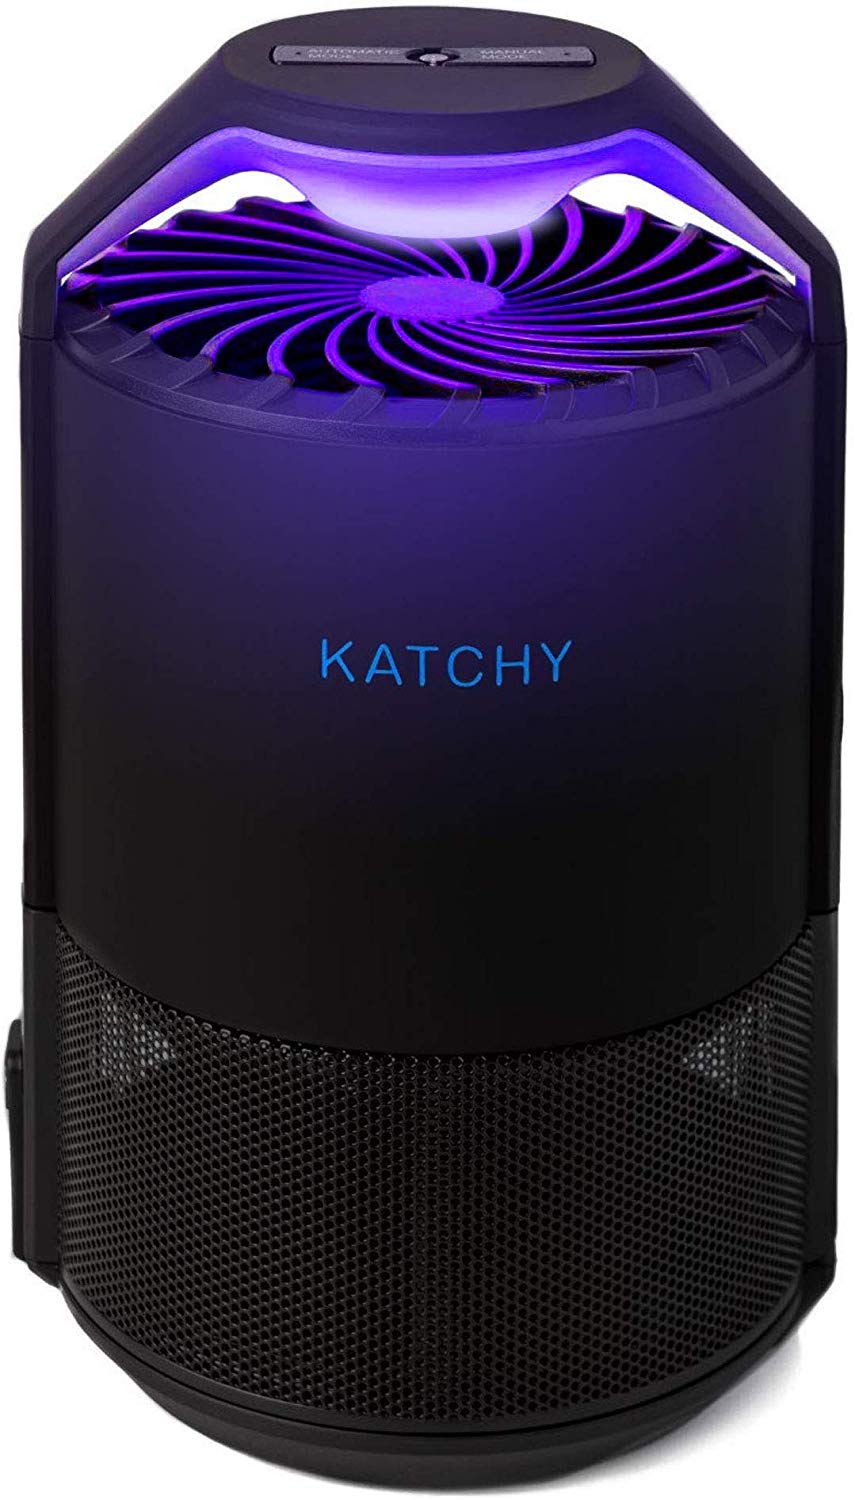 KATCHY Indoor Insect Trap